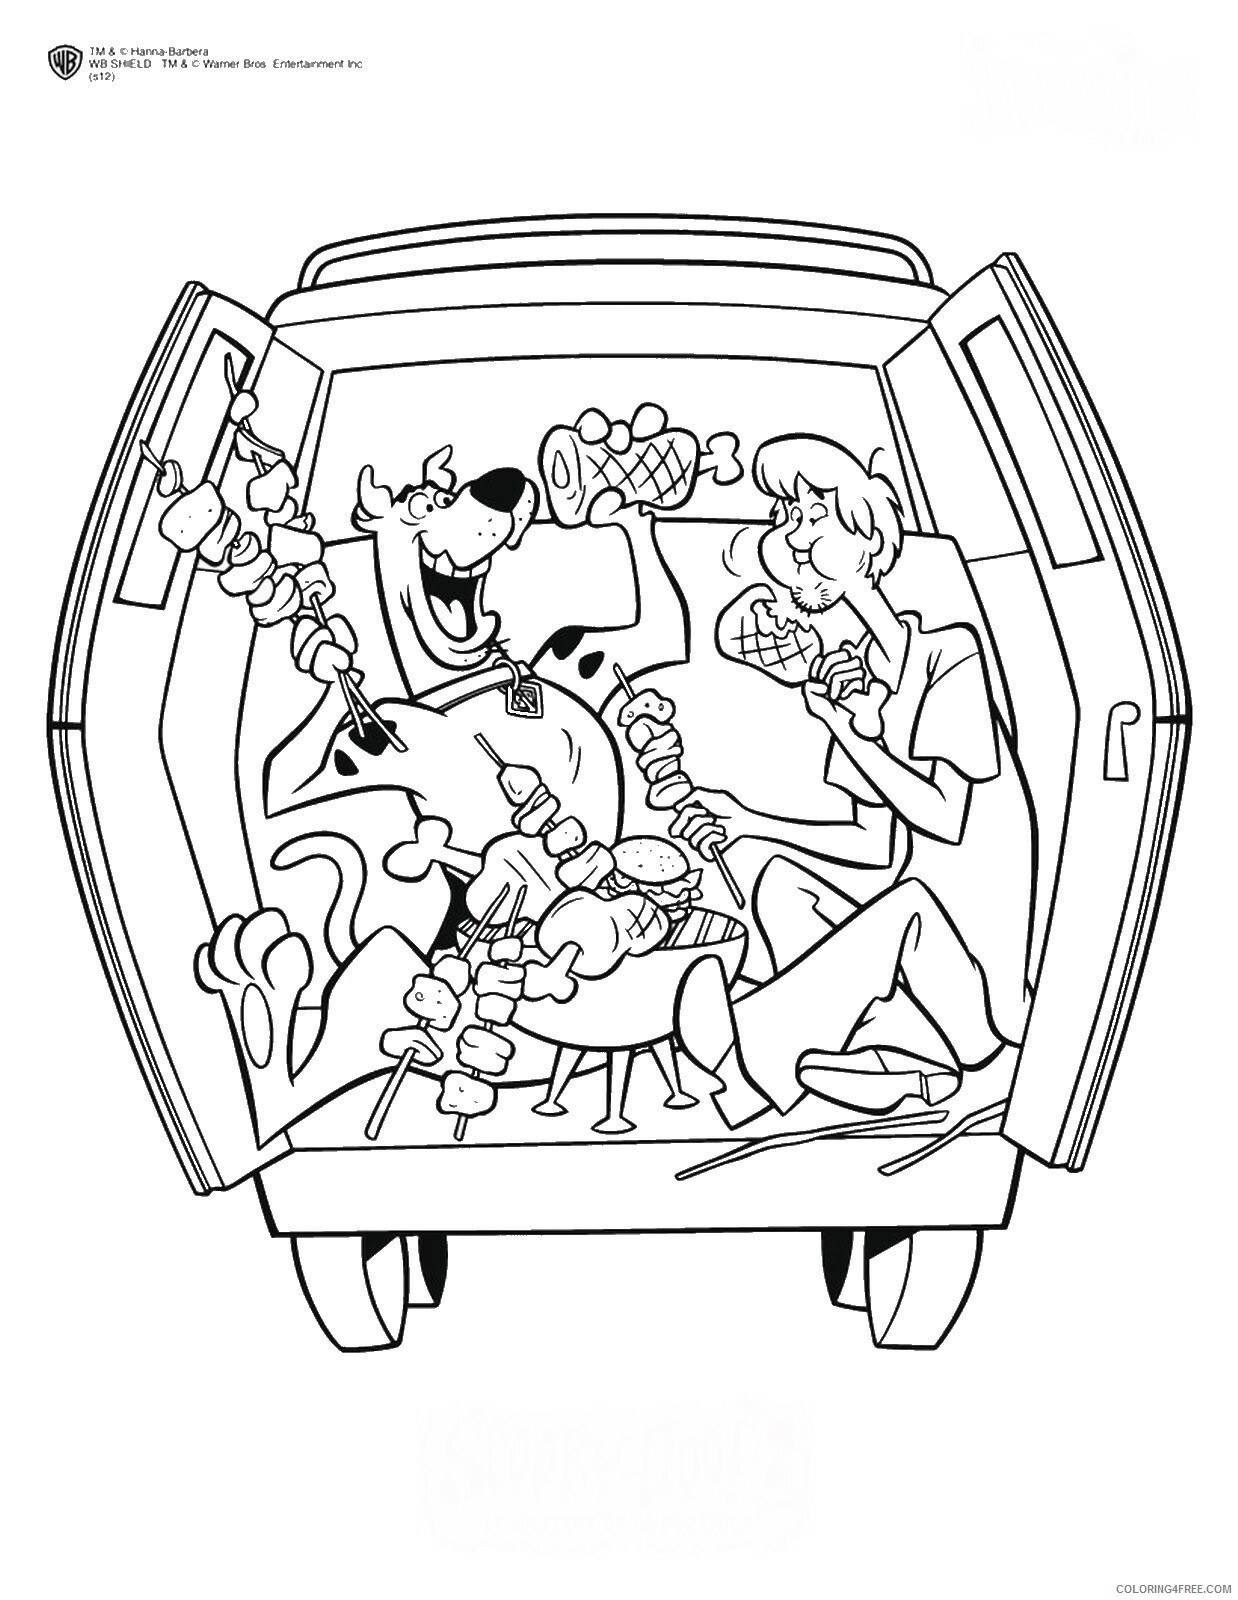 Scooby Doo Coloring Pages TV Film scooby_doo_cl_01 Printable 2020 07264 Coloring4free